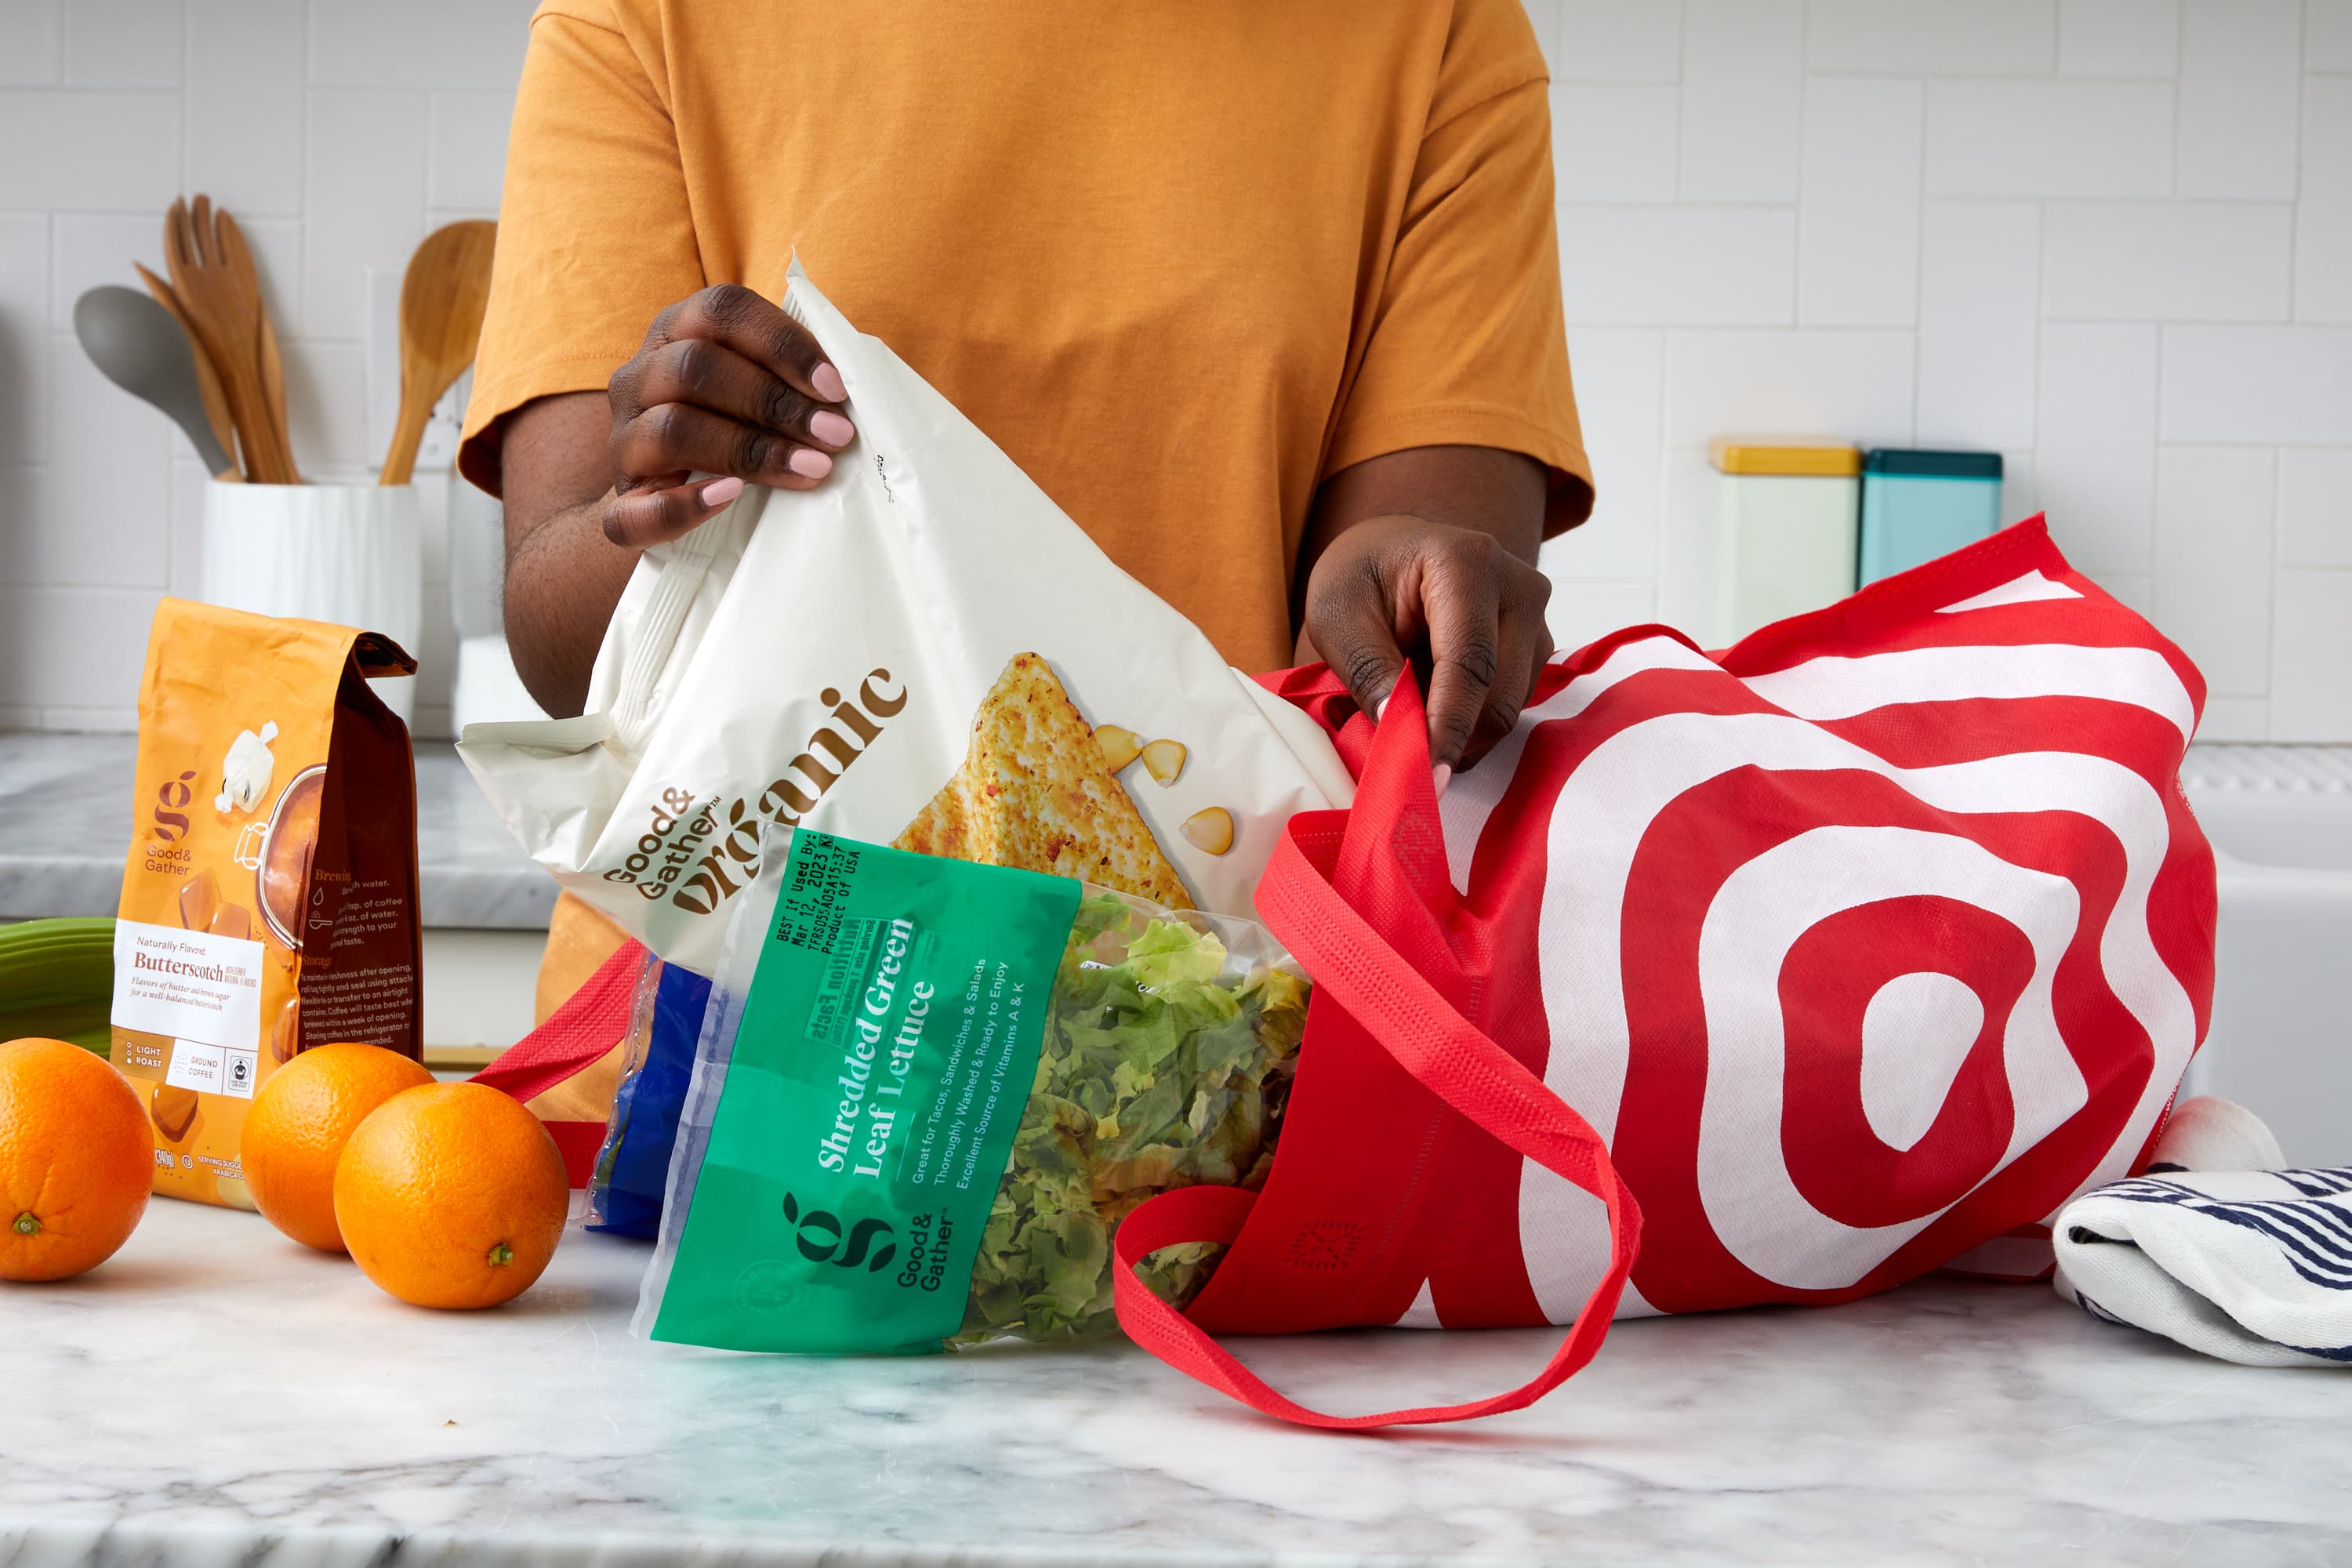 Shopping for one: A dozen grocery hacks for living single 